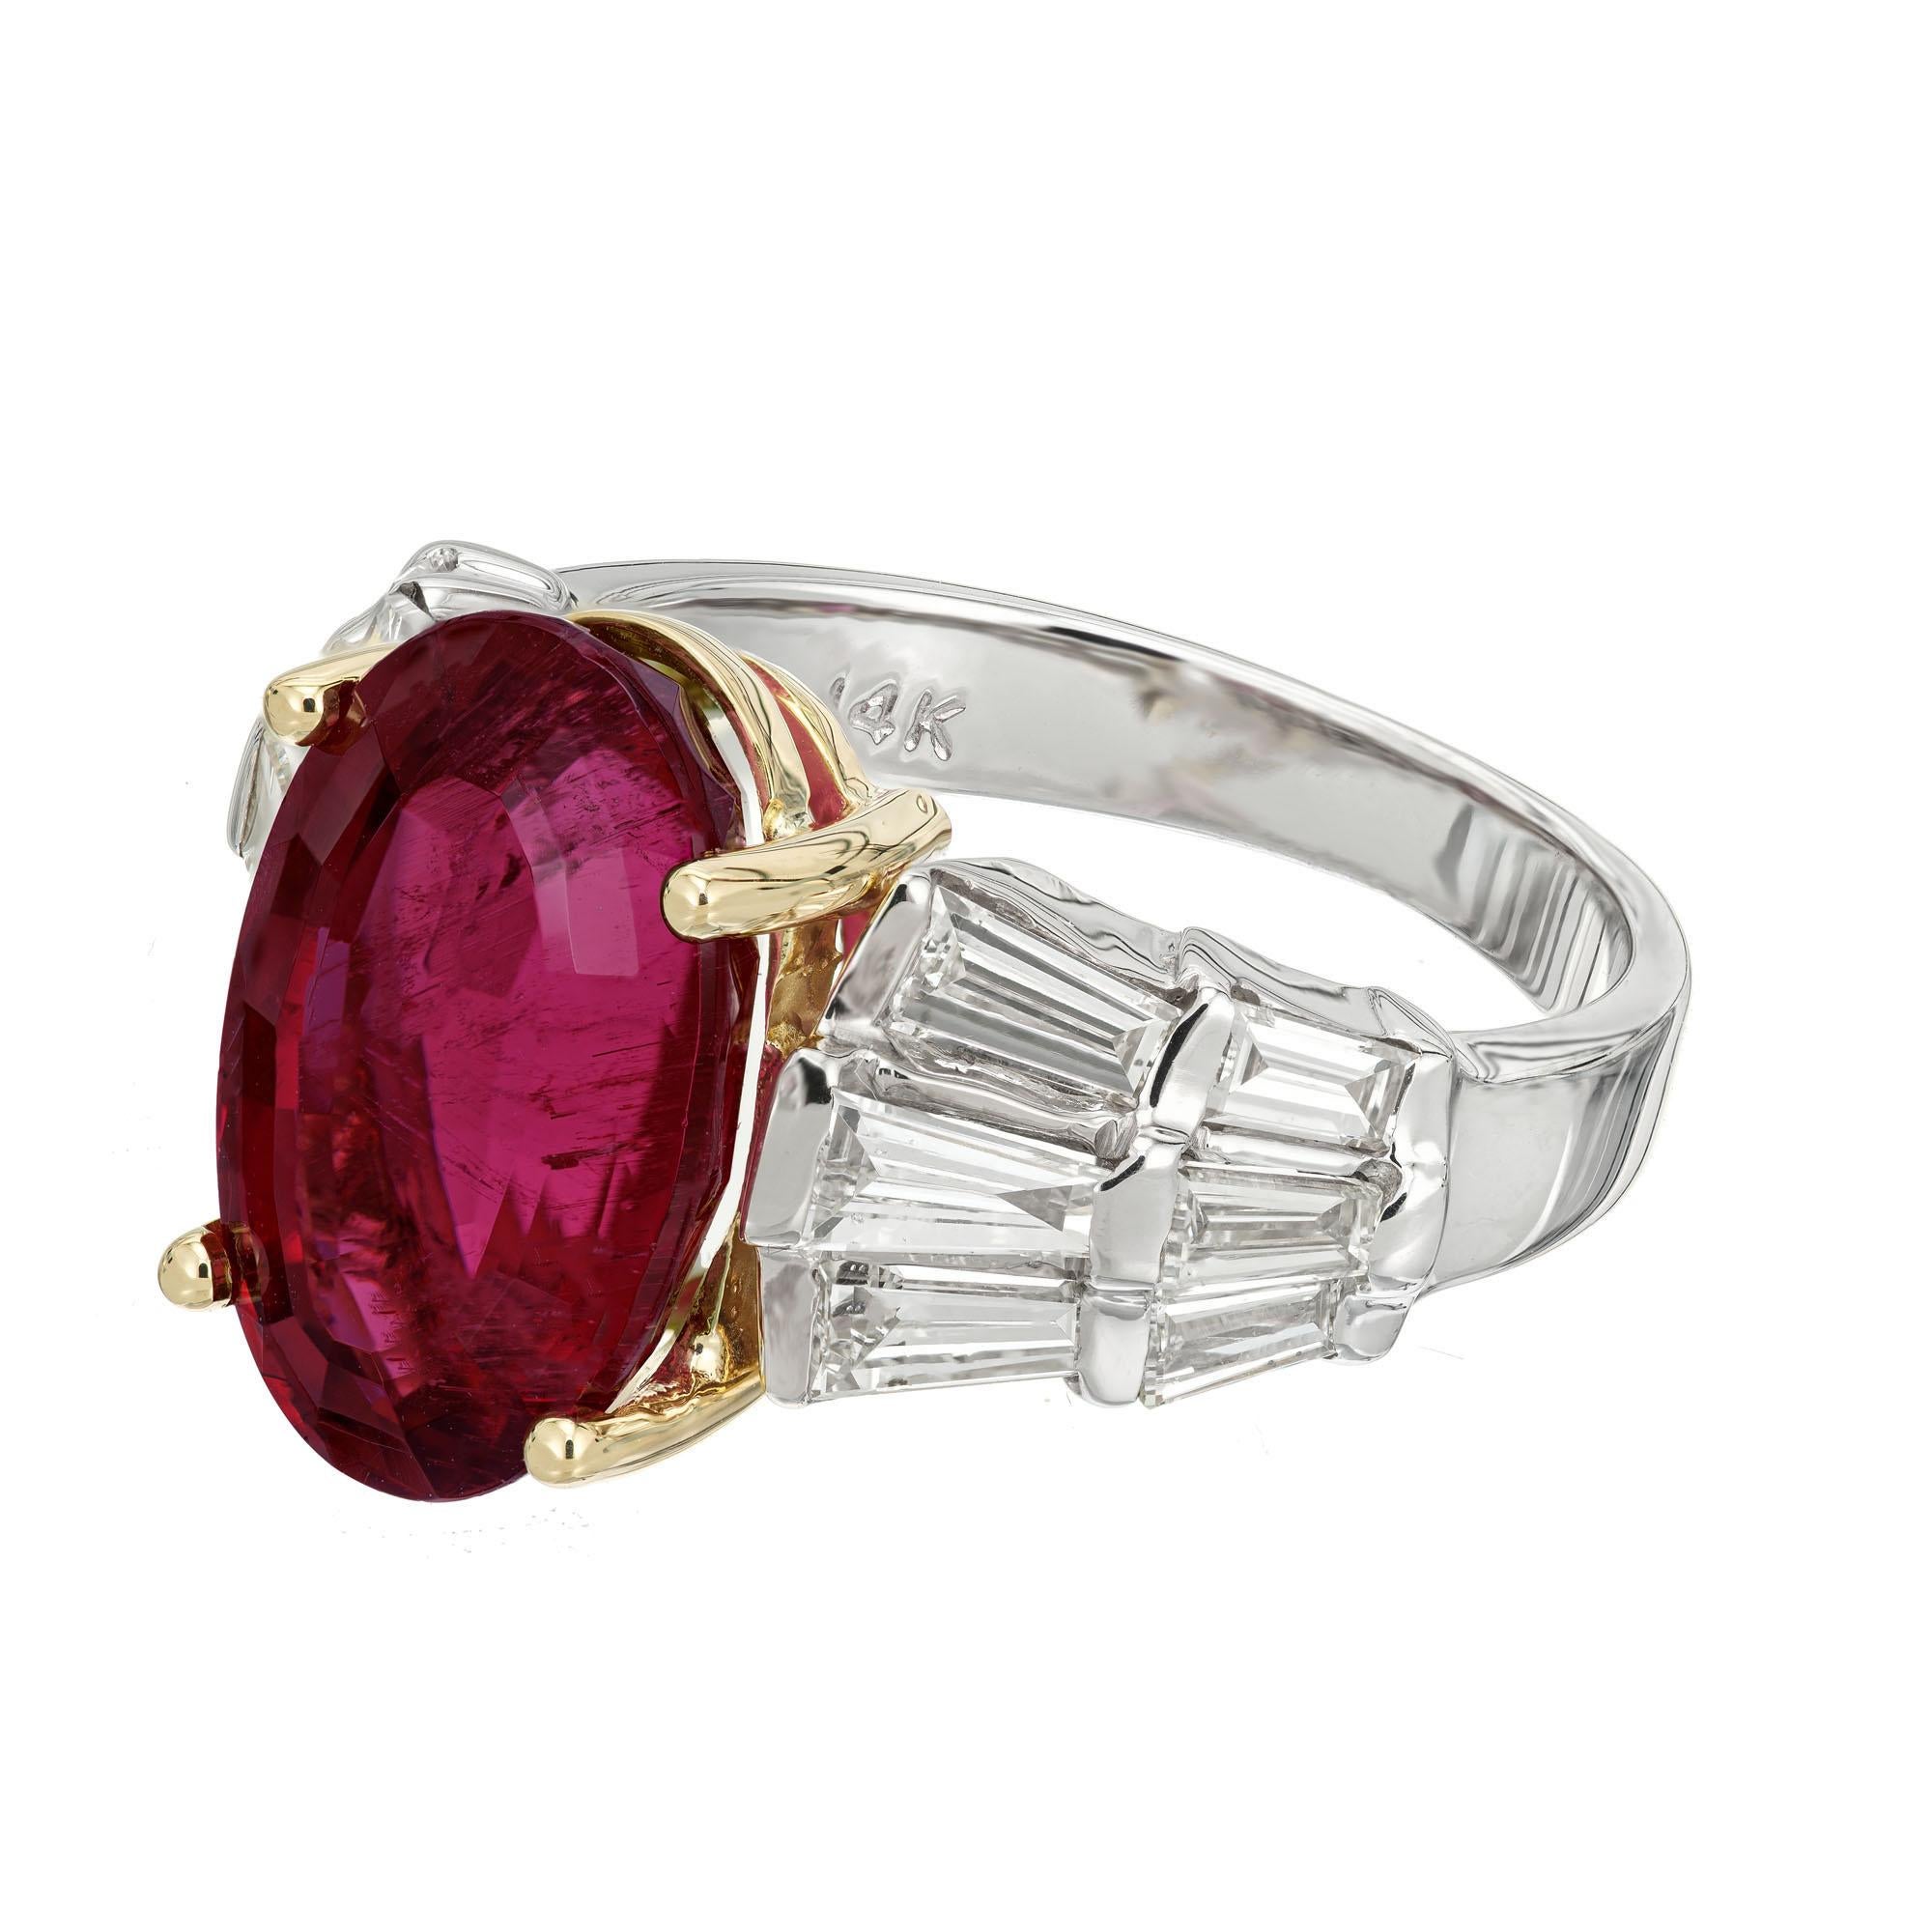 6.35 Carat Oval Rubelite Tourmaline Diamond Gold Cocktail Engagement Ring In Good Condition For Sale In Stamford, CT